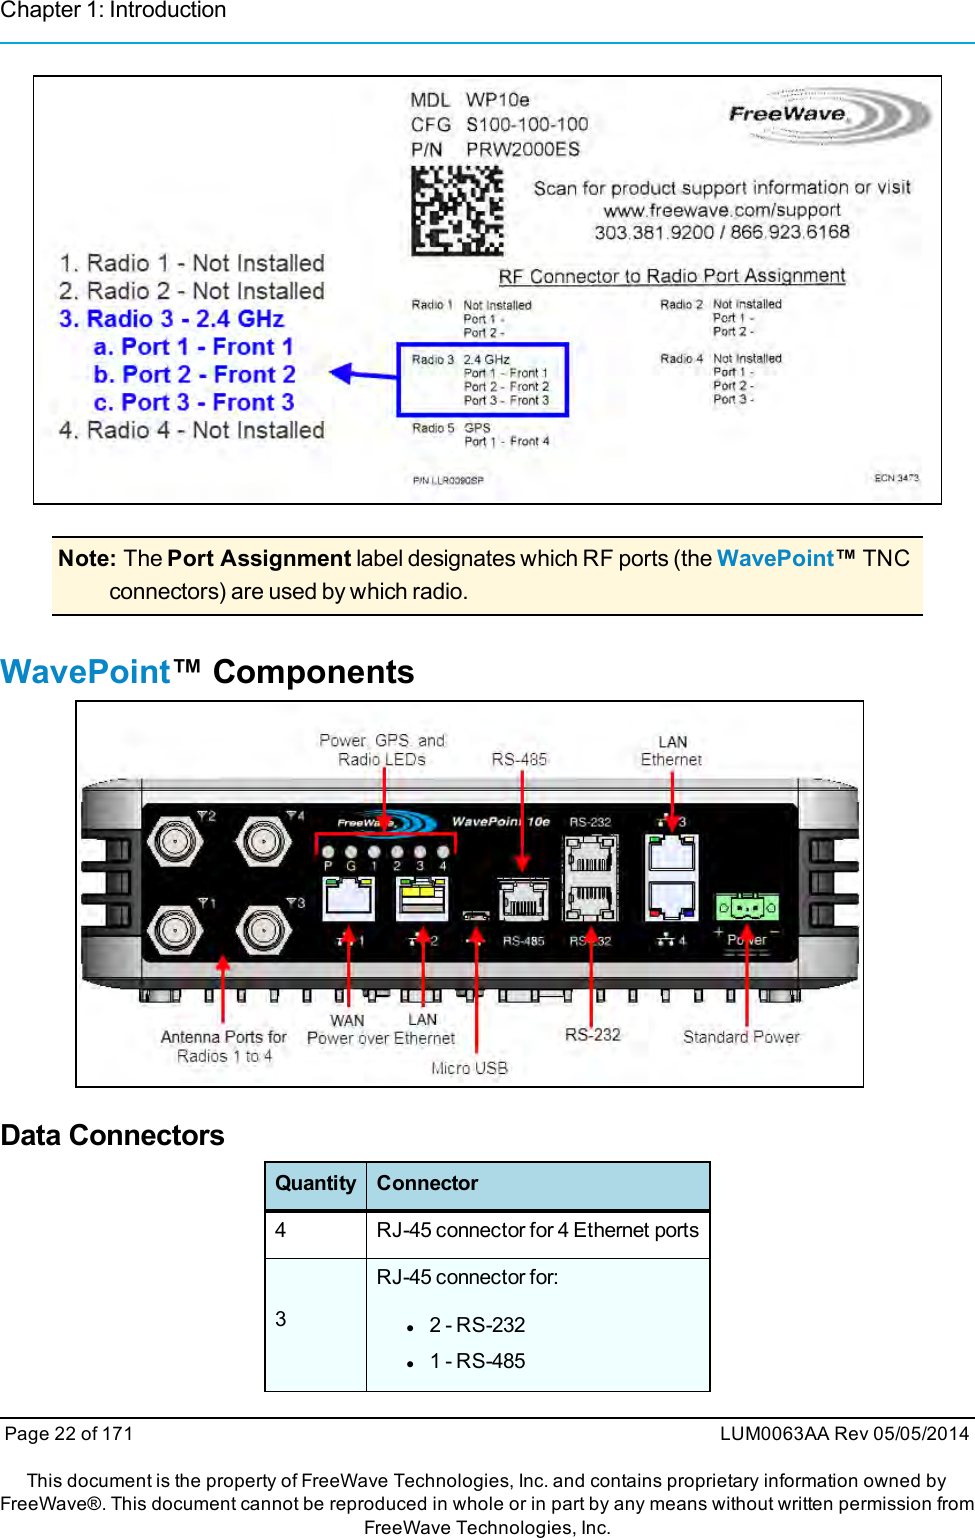 Chapter 1: IntroductionNote: The Port Assignment label designates which RF ports (the WavePoint™TNCconnectors) are used by which radio.WavePoint™ ComponentsData ConnectorsQuantity Connector4 RJ-45 connector for 4 Ethernet ports3RJ-45 connector for:l2 - RS-232l1 - RS-485Page 22 of 171 LUM0063AA Rev 05/05/2014This document is the property of FreeWave Technologies, Inc. and contains proprietary information owned byFreeWave®. This document cannot be reproduced in whole or in part by any means without written permission fromFreeWave Technologies, Inc.